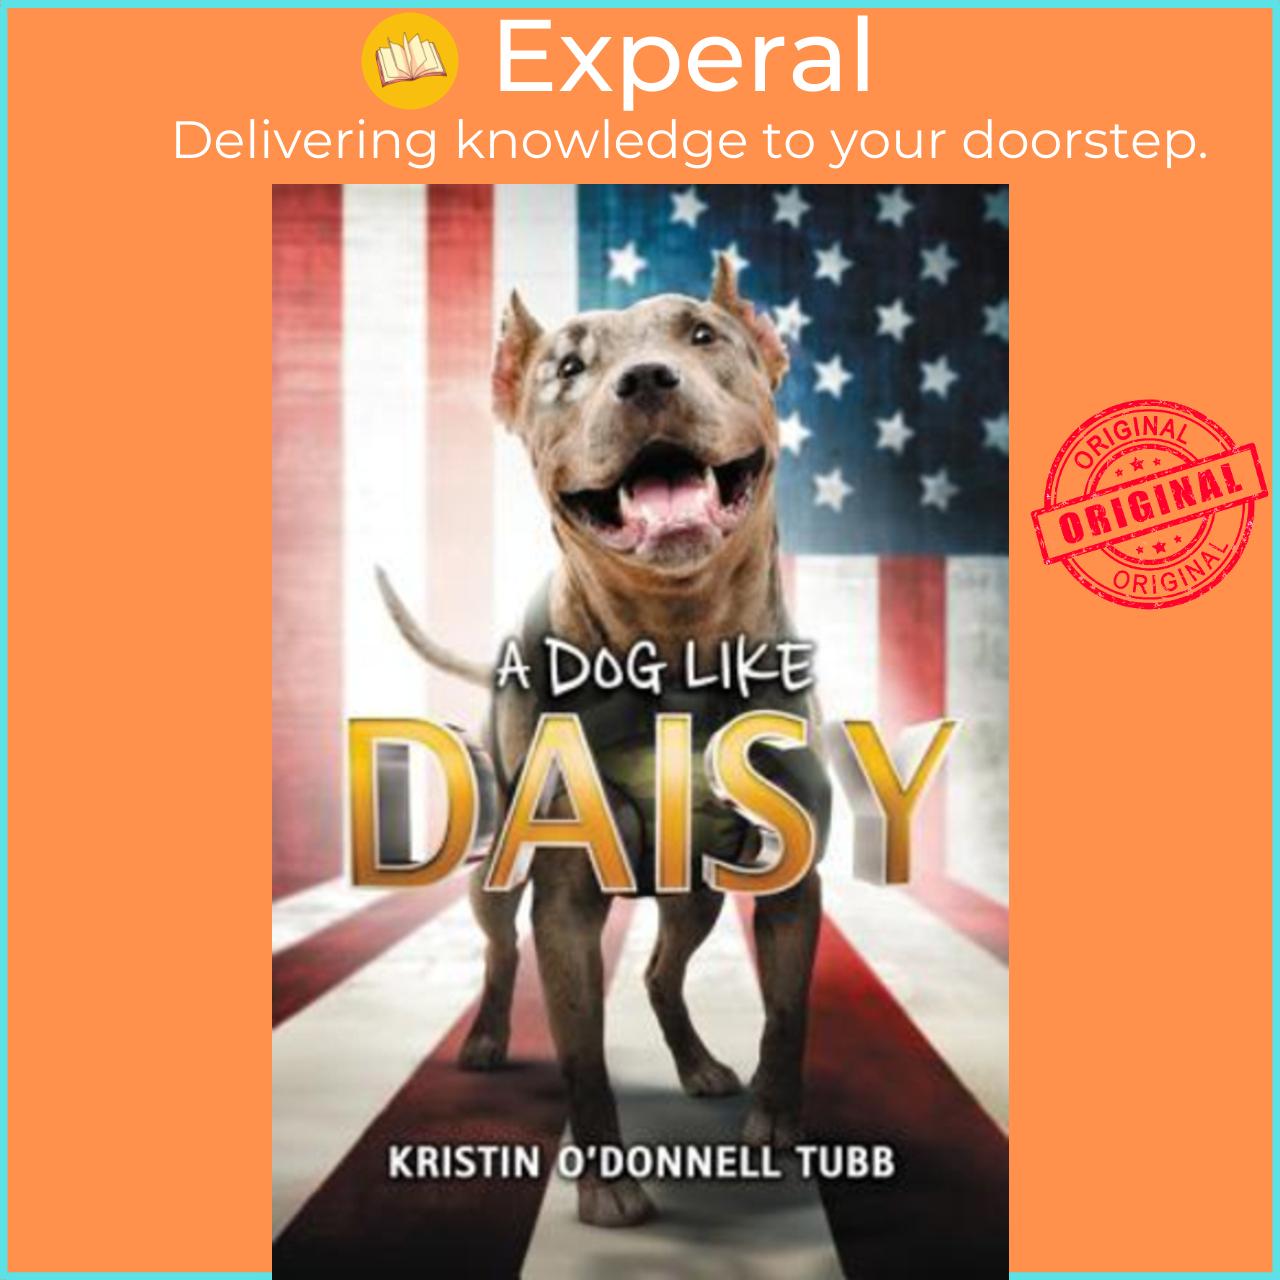 Sách - A Dog Like Daisy by Kristin O'Donnell Tubb (US edition, paperback)